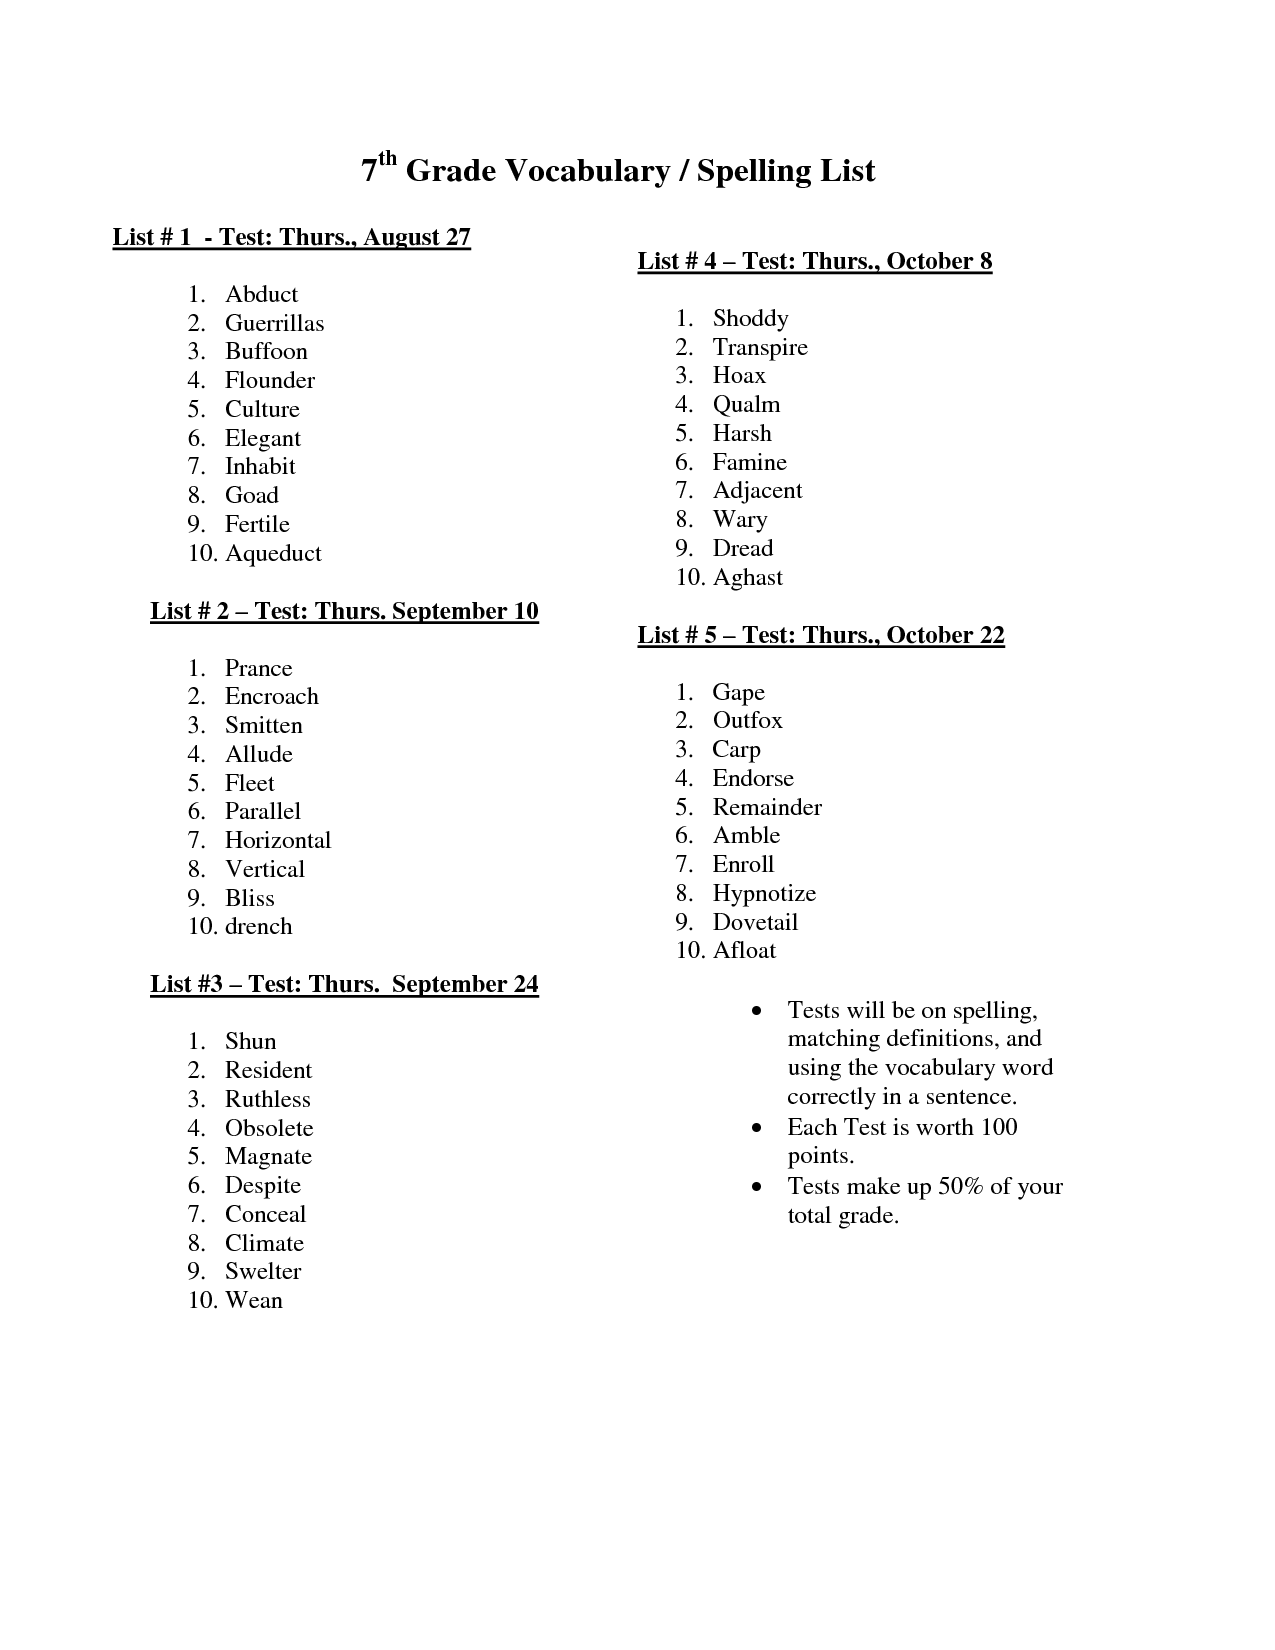 15 Best Images Of 7th Grade ROOT WORDS Worksheets 7th Grade Spelling Words 7th Grade